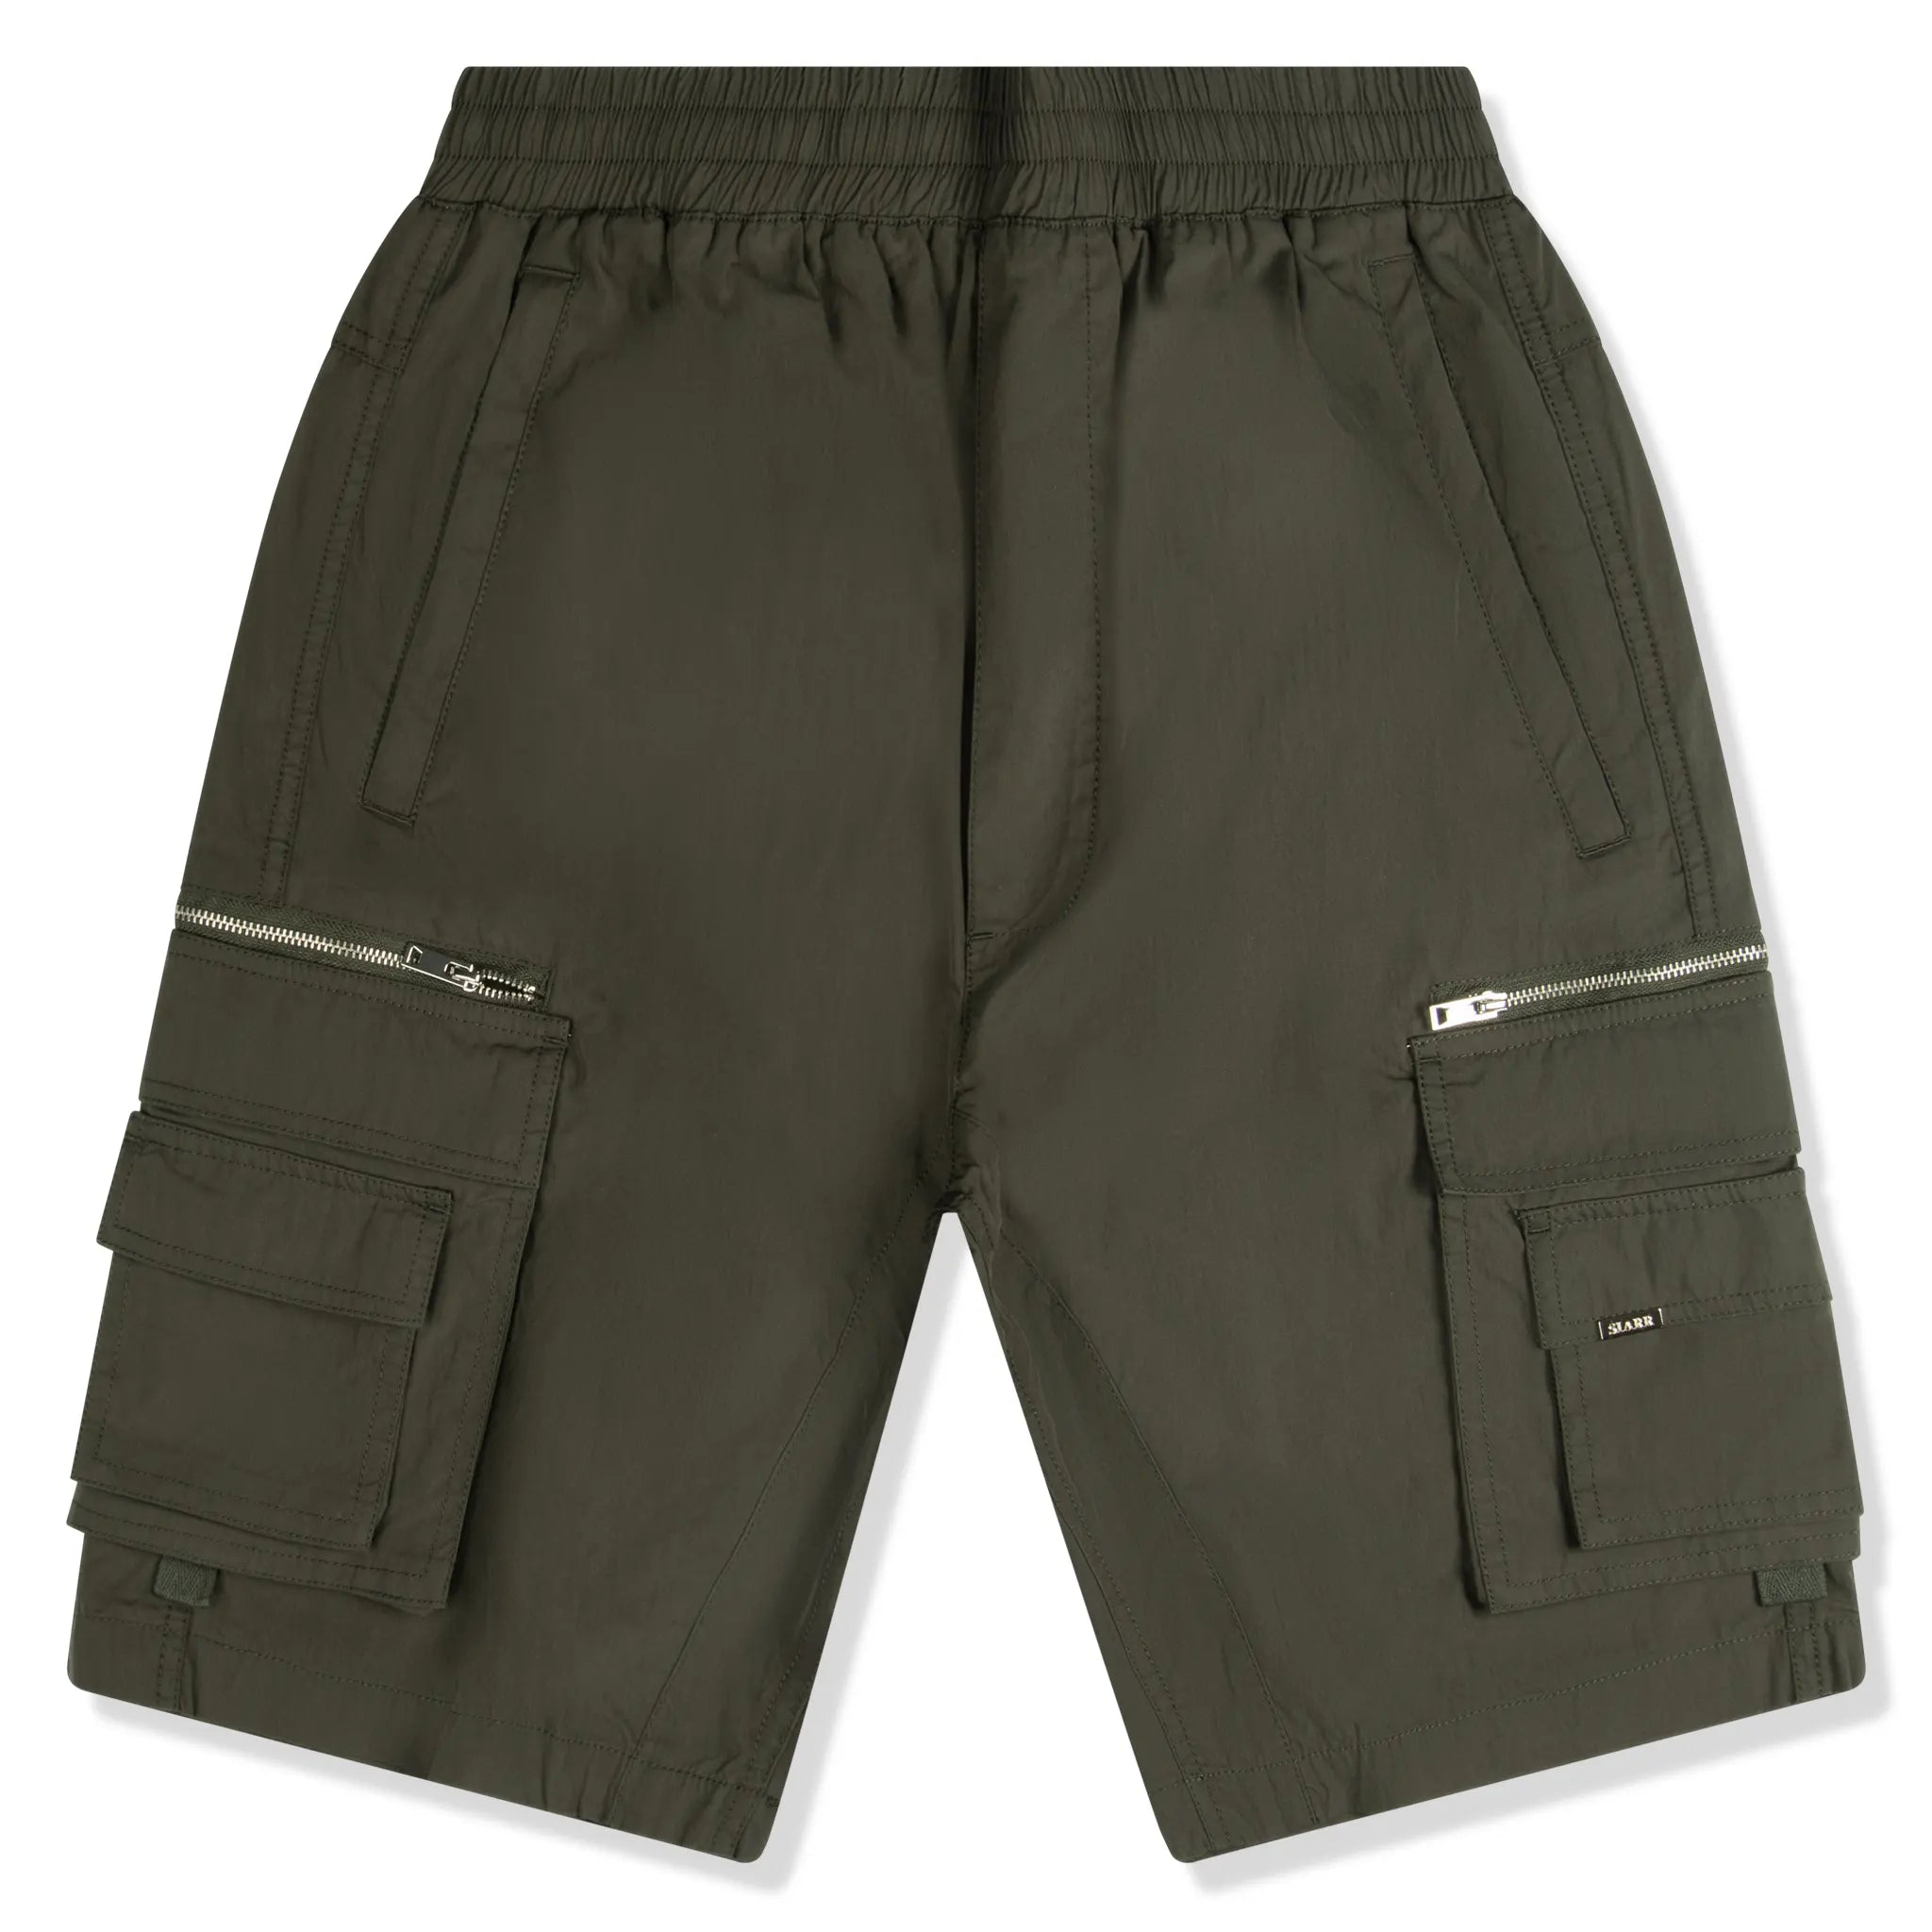 Front view of SIARR Military Shorts Dark Green